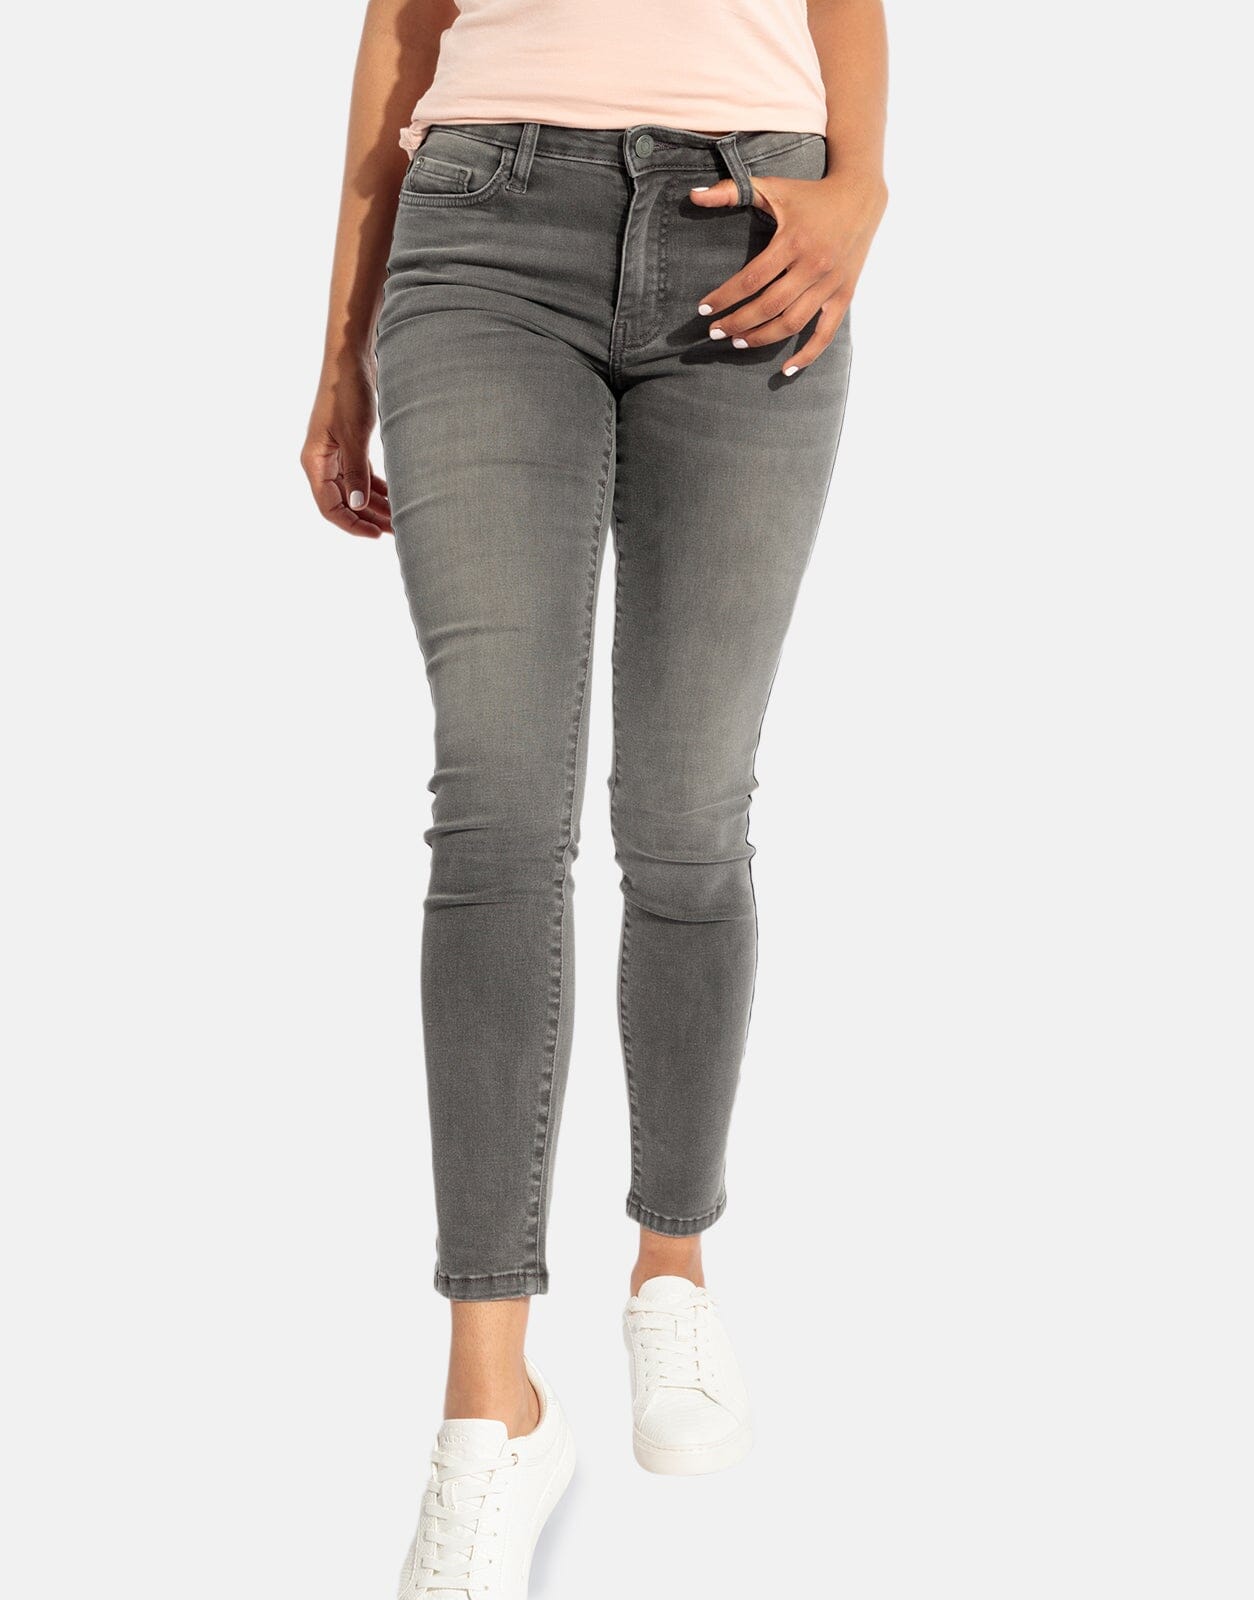 Guess Sexy Curve Grey Wash Jeans - Subwear